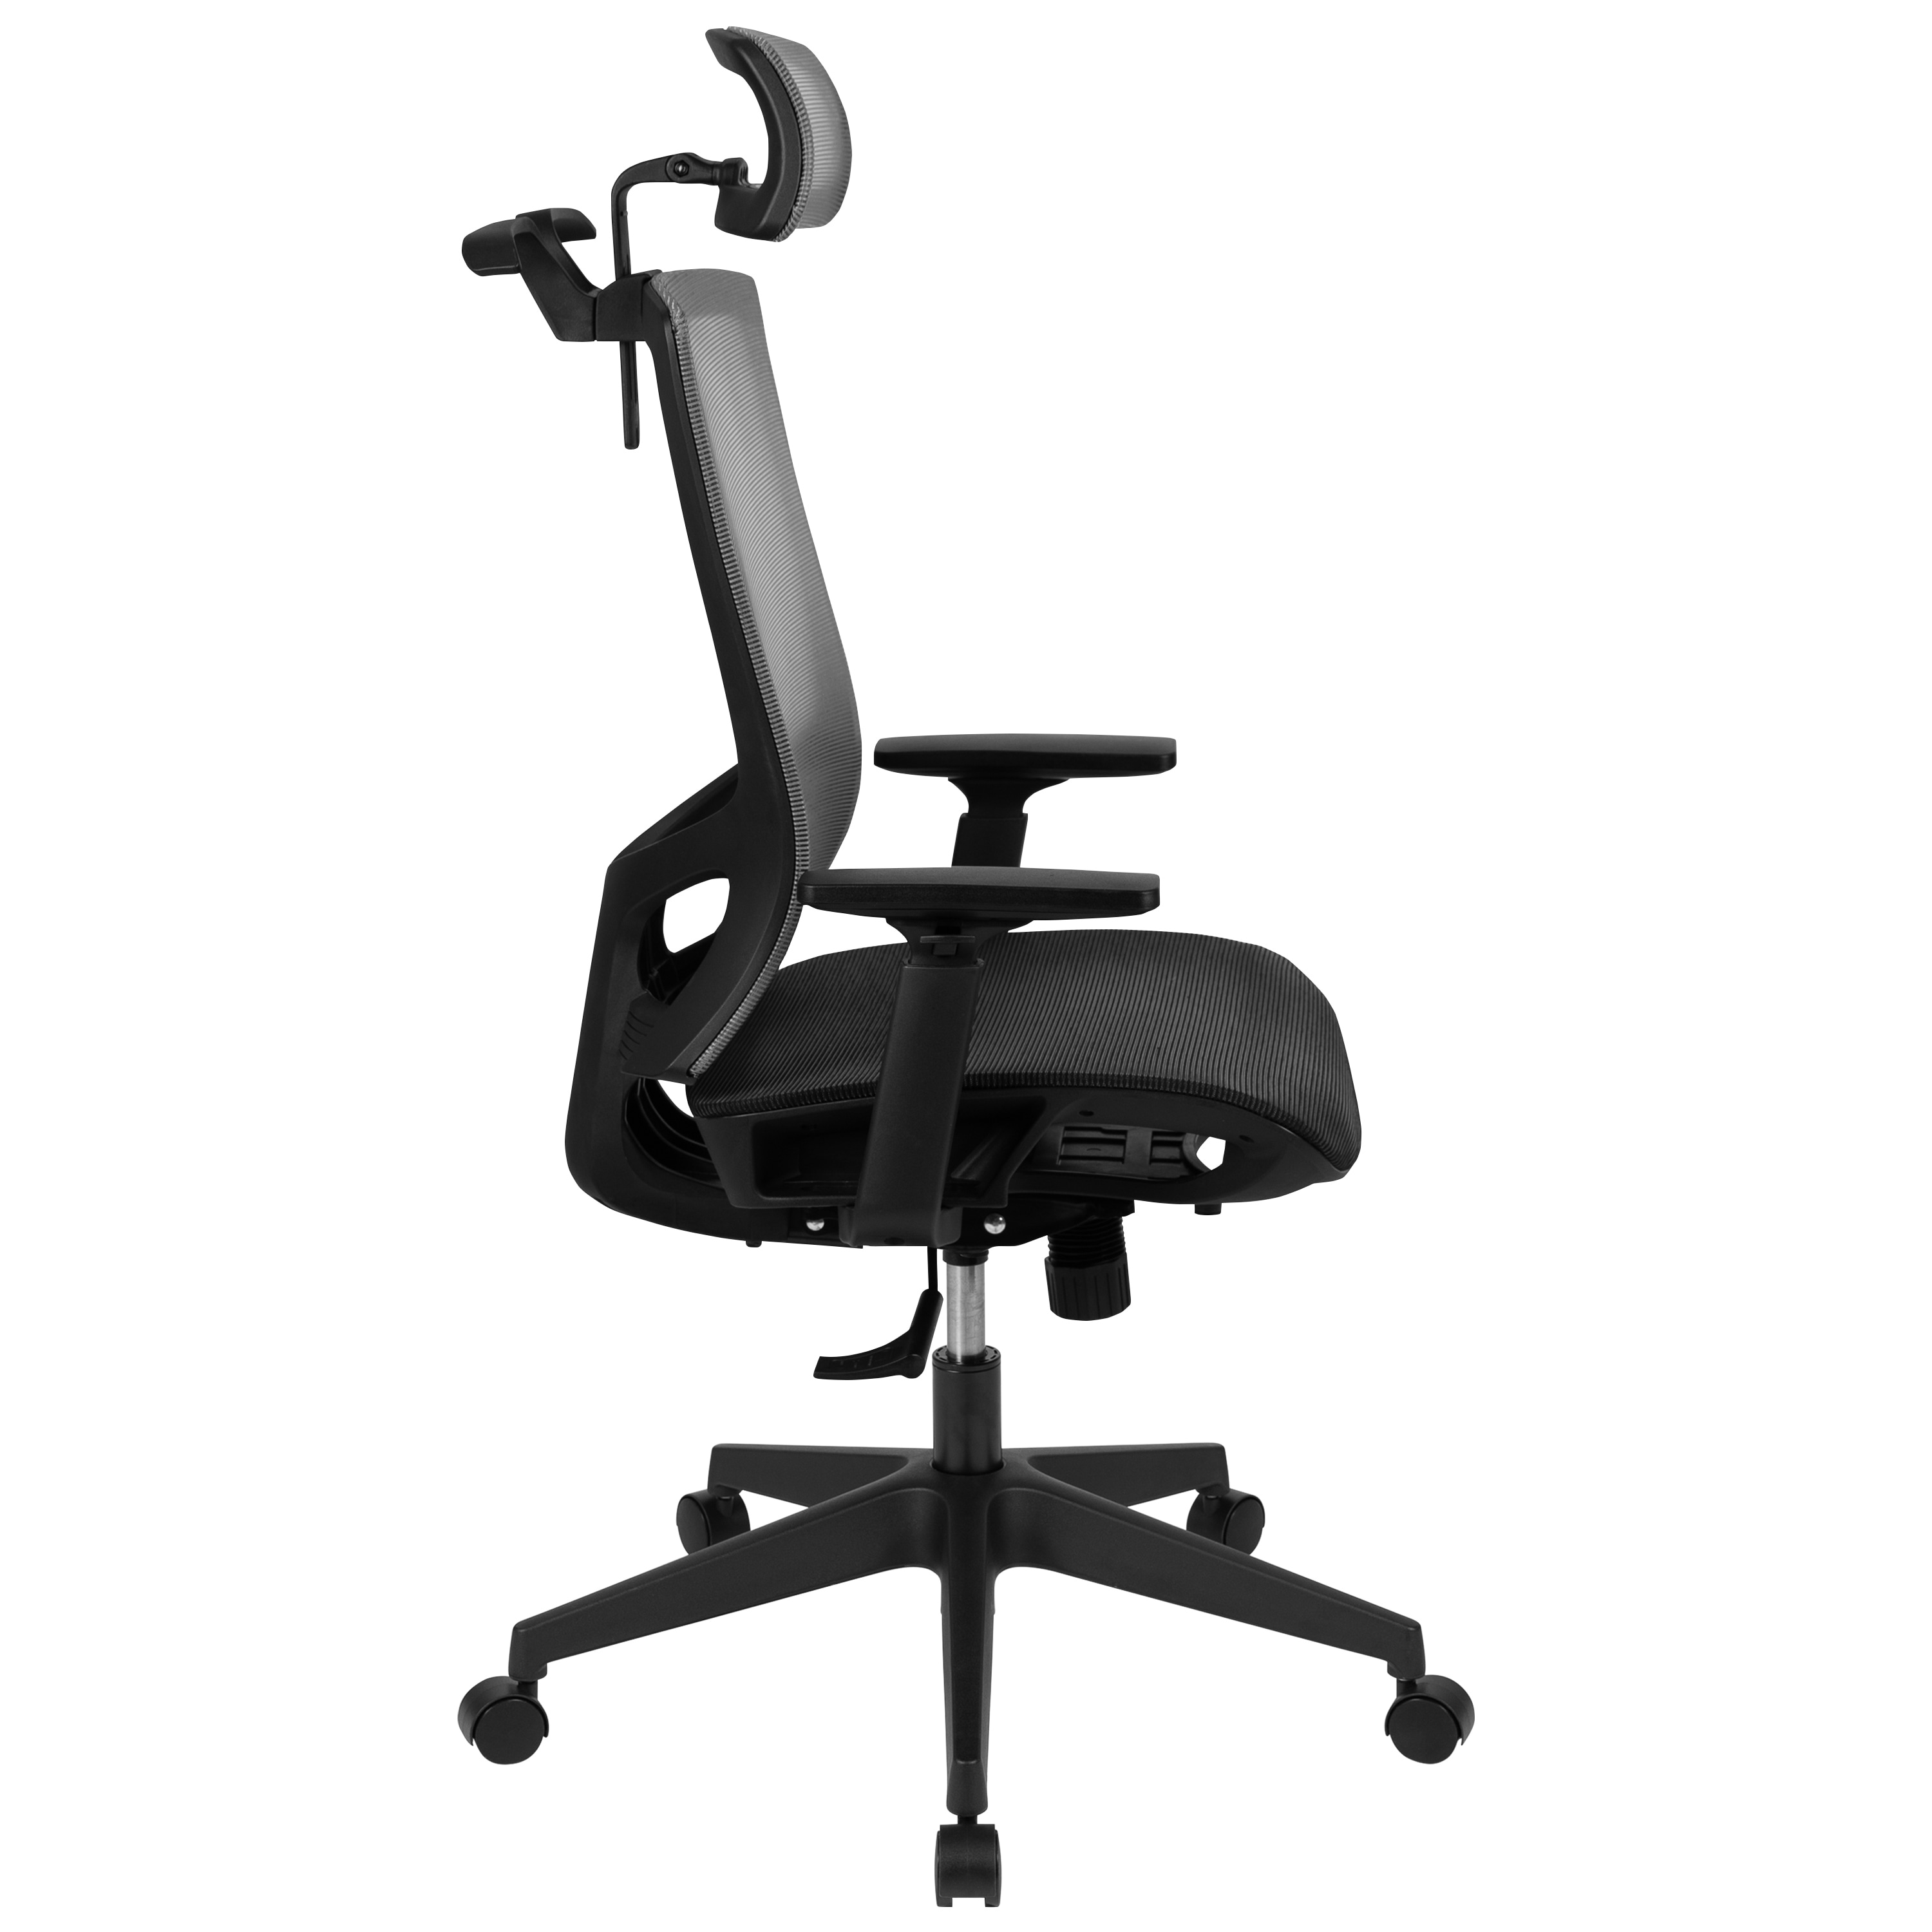 https://ak1.ostkcdn.com/images/products/is/images/direct/c4595abbf327fd620789a4b00c68f4074fca659b/Ergonomic-Mesh-Office-Chair-with-Synchro-Tilt%2C-Pivot-Headrest%2C-Adjustable-Arms.jpg